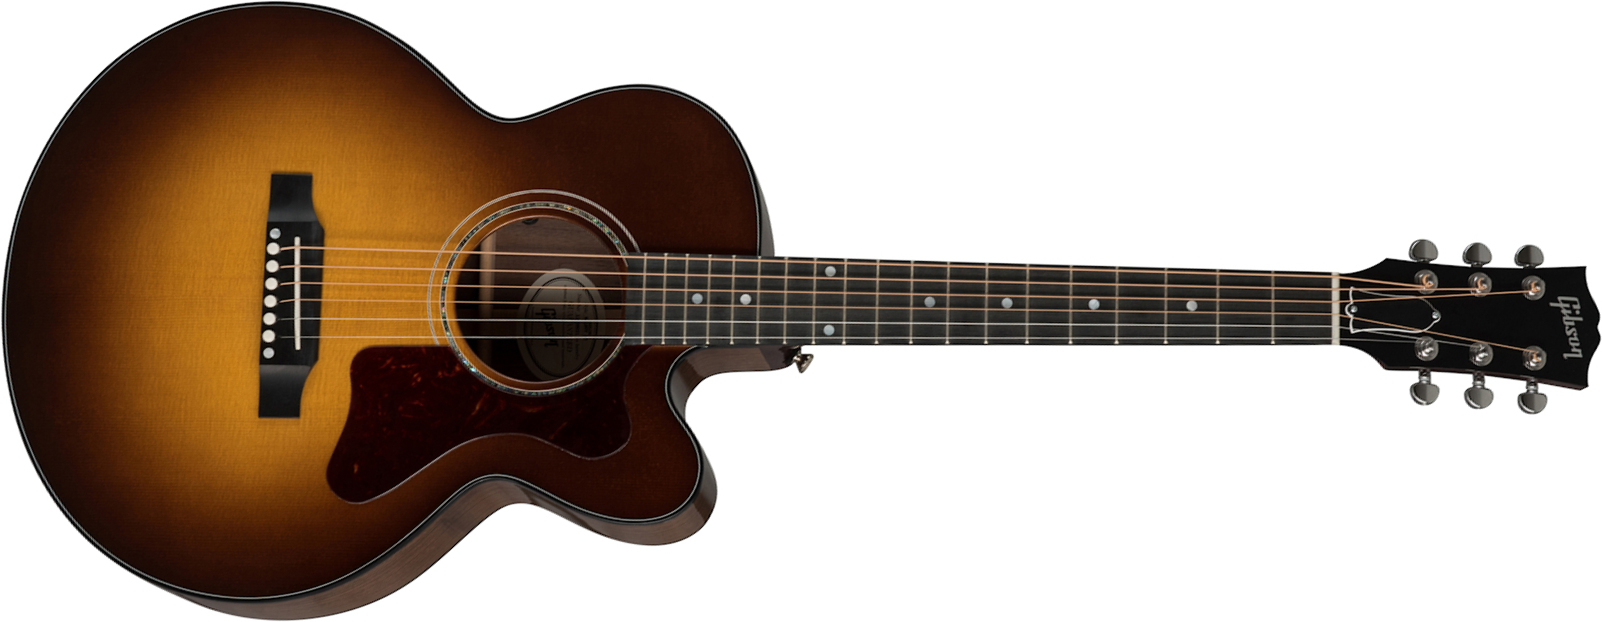 Gibson Parlor Walnut M 2019 Small Body Cw Epicea Noyer Ric - Walnut Burst - Guitare Acoustique - Main picture